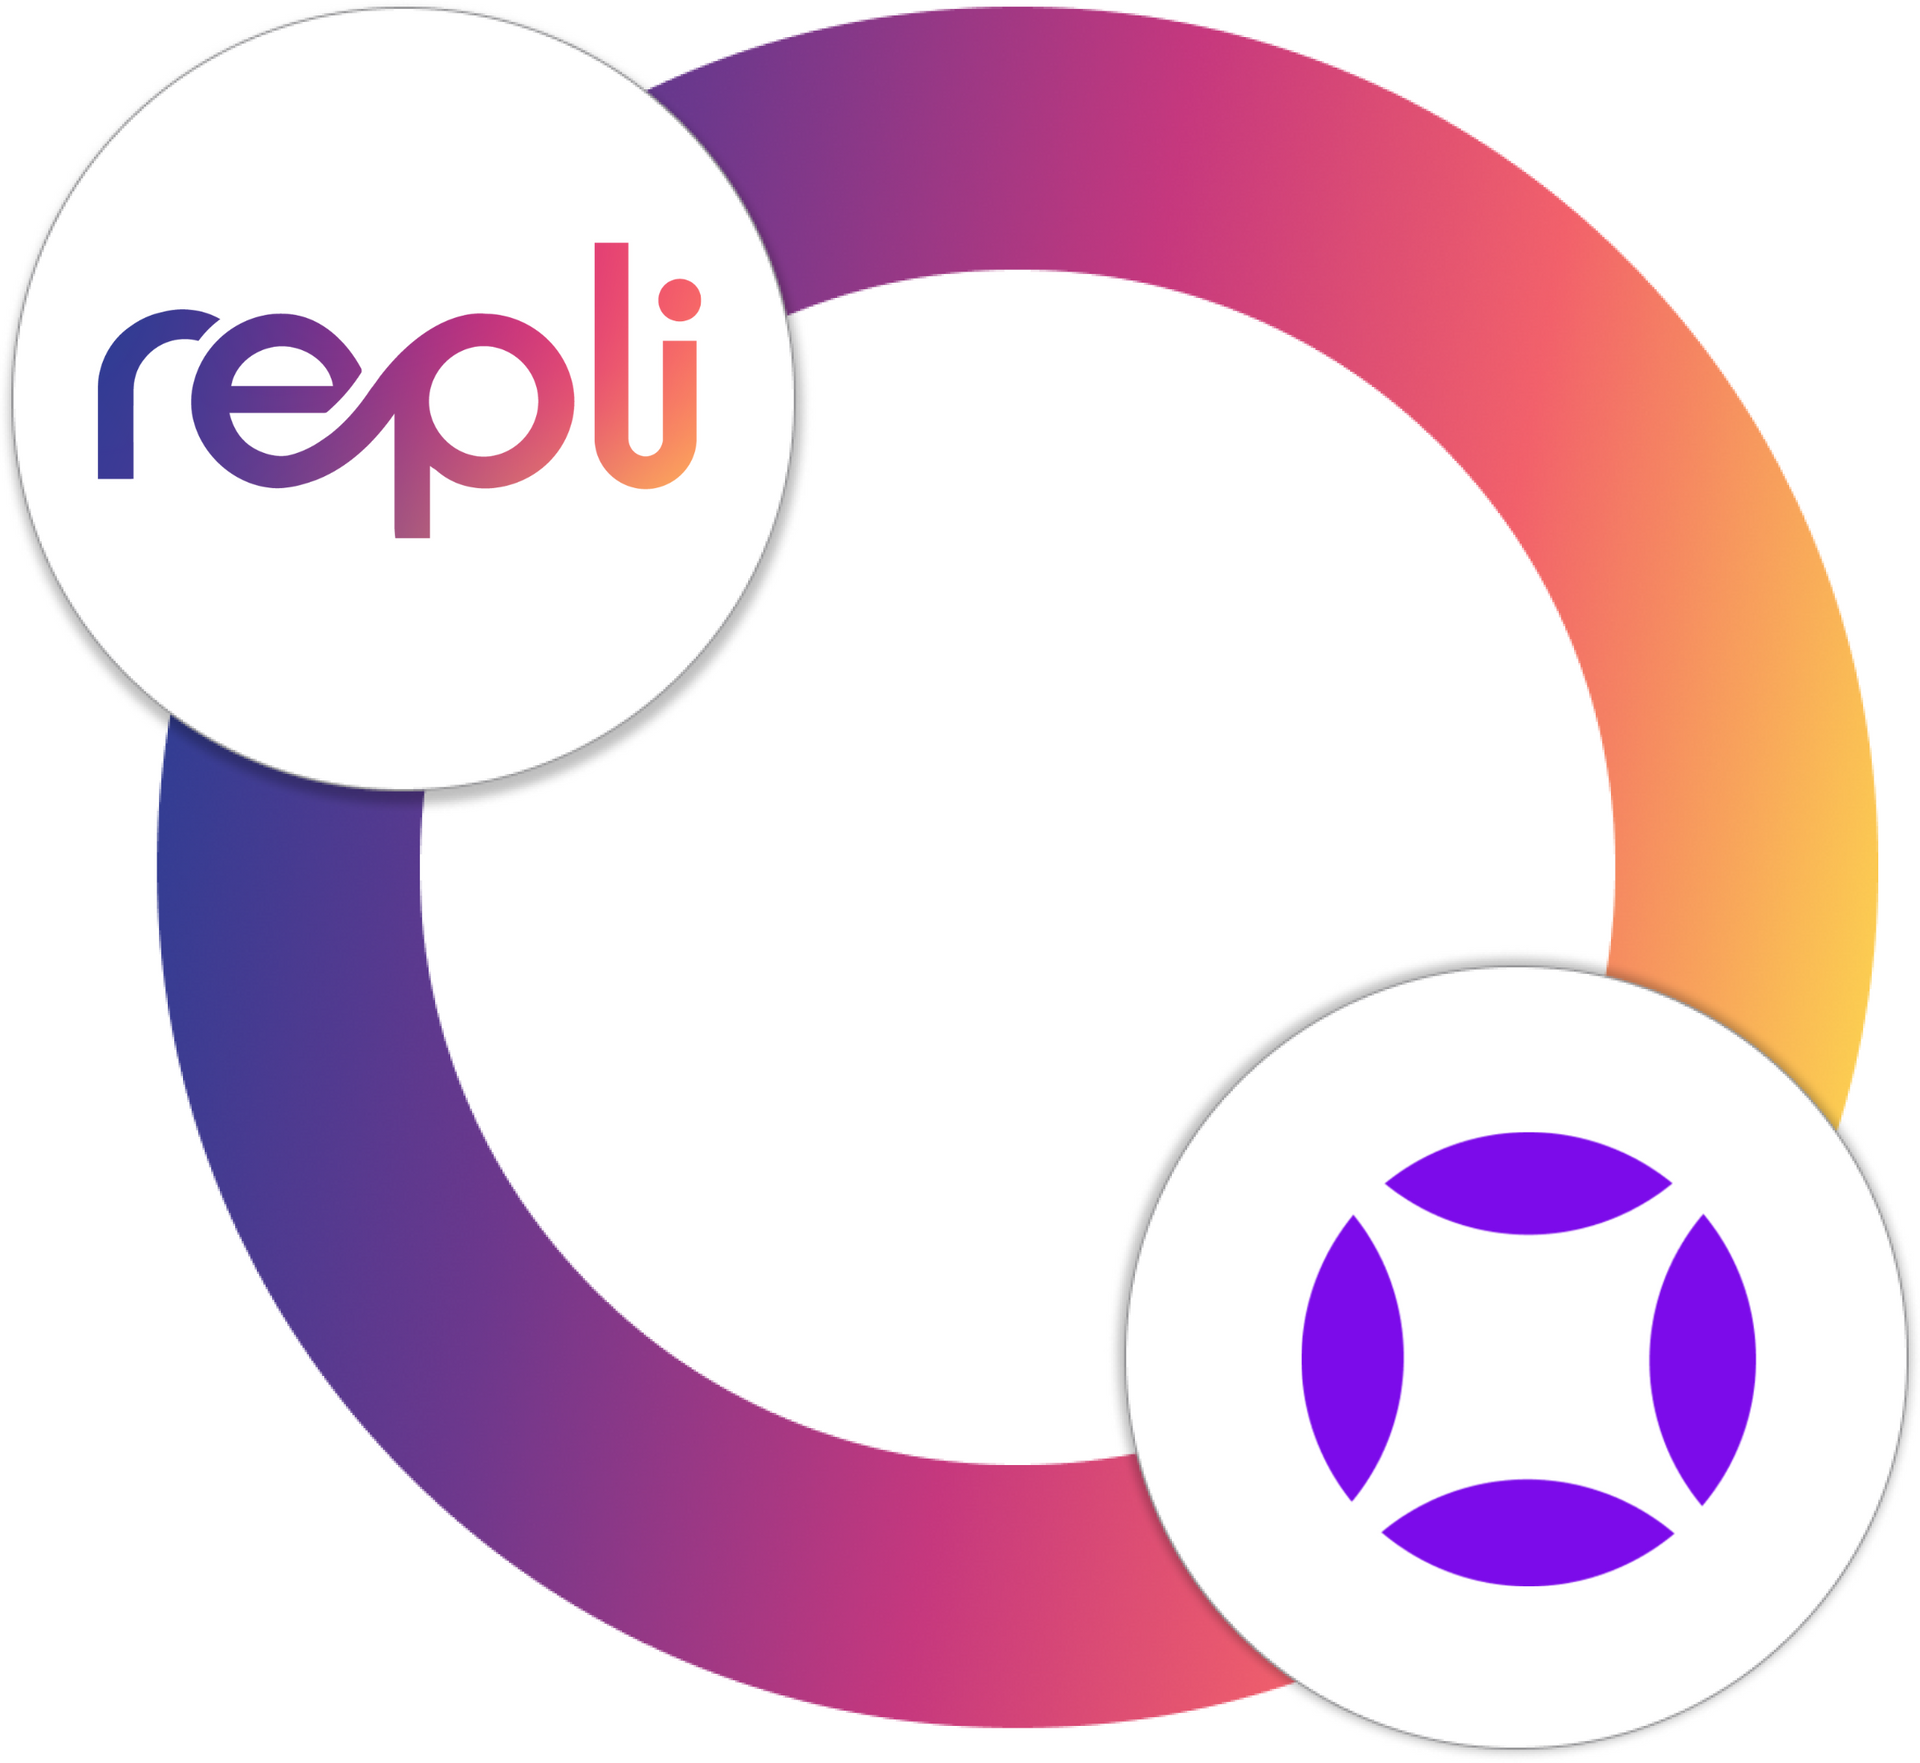 A colorful circle with the Repli logo and AudioEye logo on it.